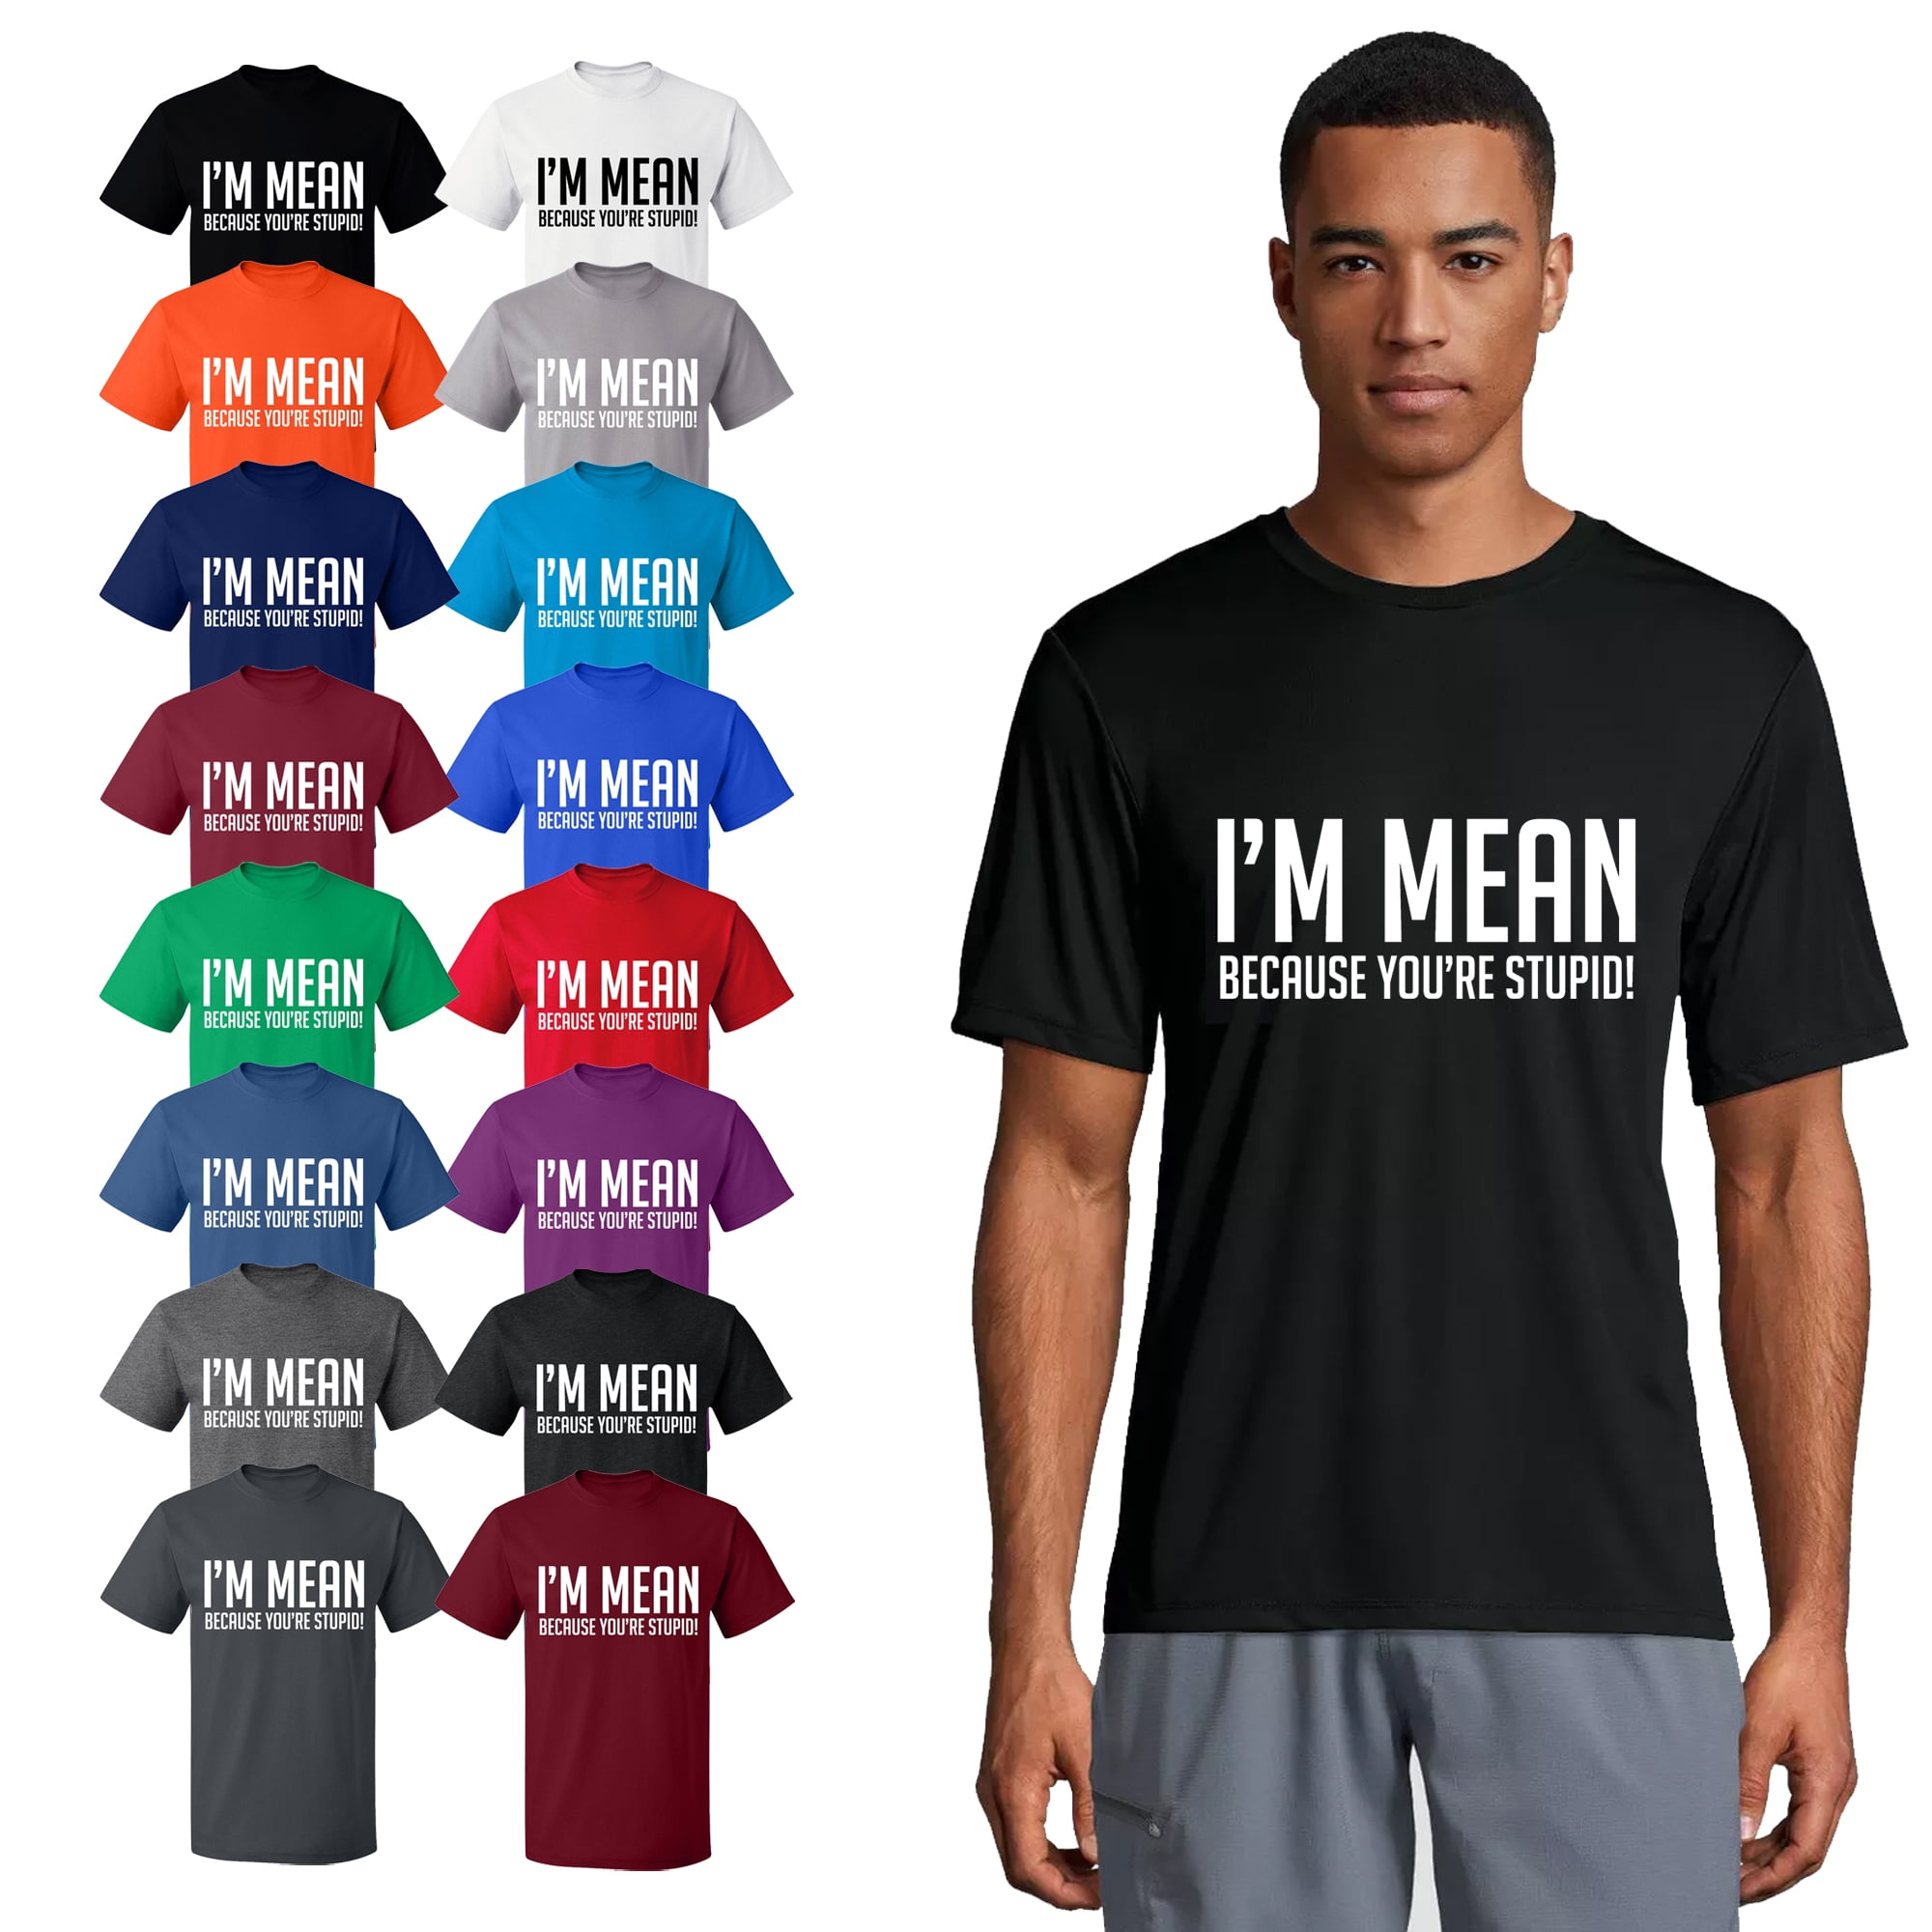 OXI T-Shirt - I Am Mean Because You Are Stupid, Basic Casual T-Shirt for  Men's and Women Fleece T-Shirt Short Sleeve - Dark Heather X-Large 